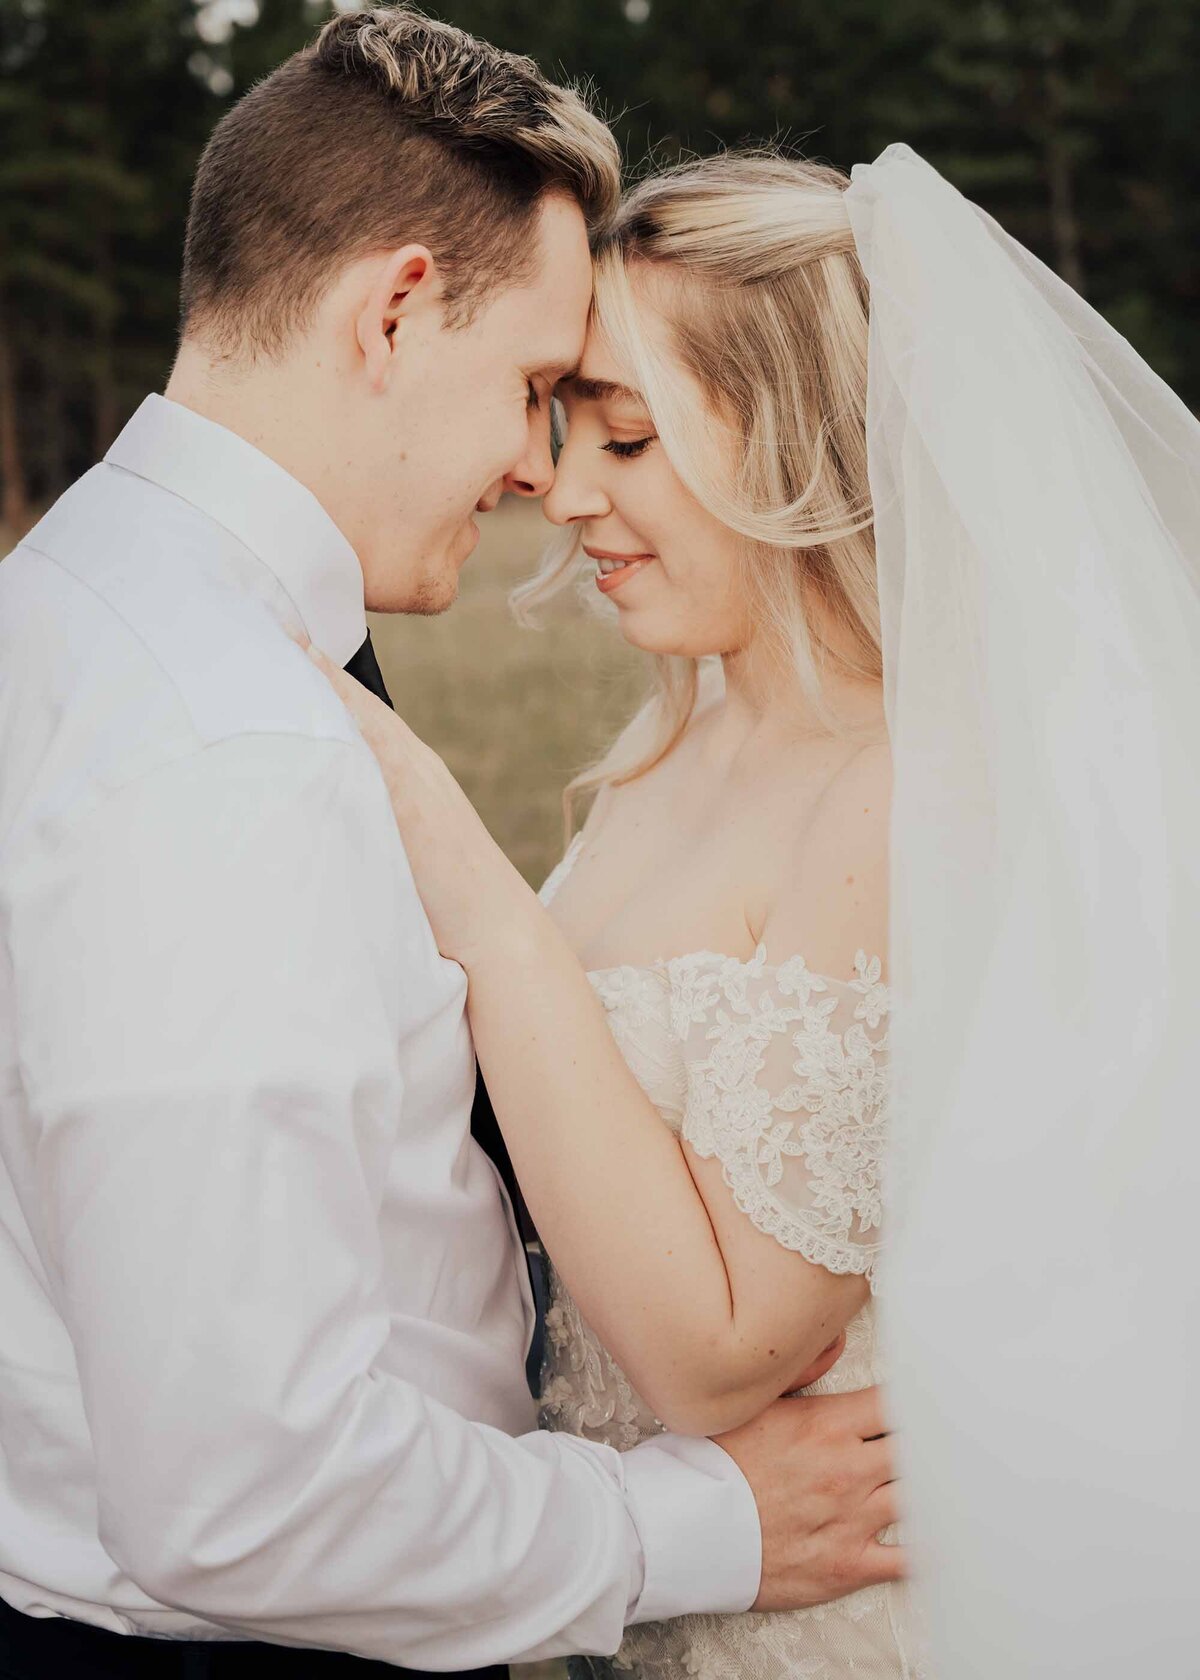 Maddie Rae Photography wedding couple standing face to face touching foreheads. her hands are on his chest and his hands are around her waist